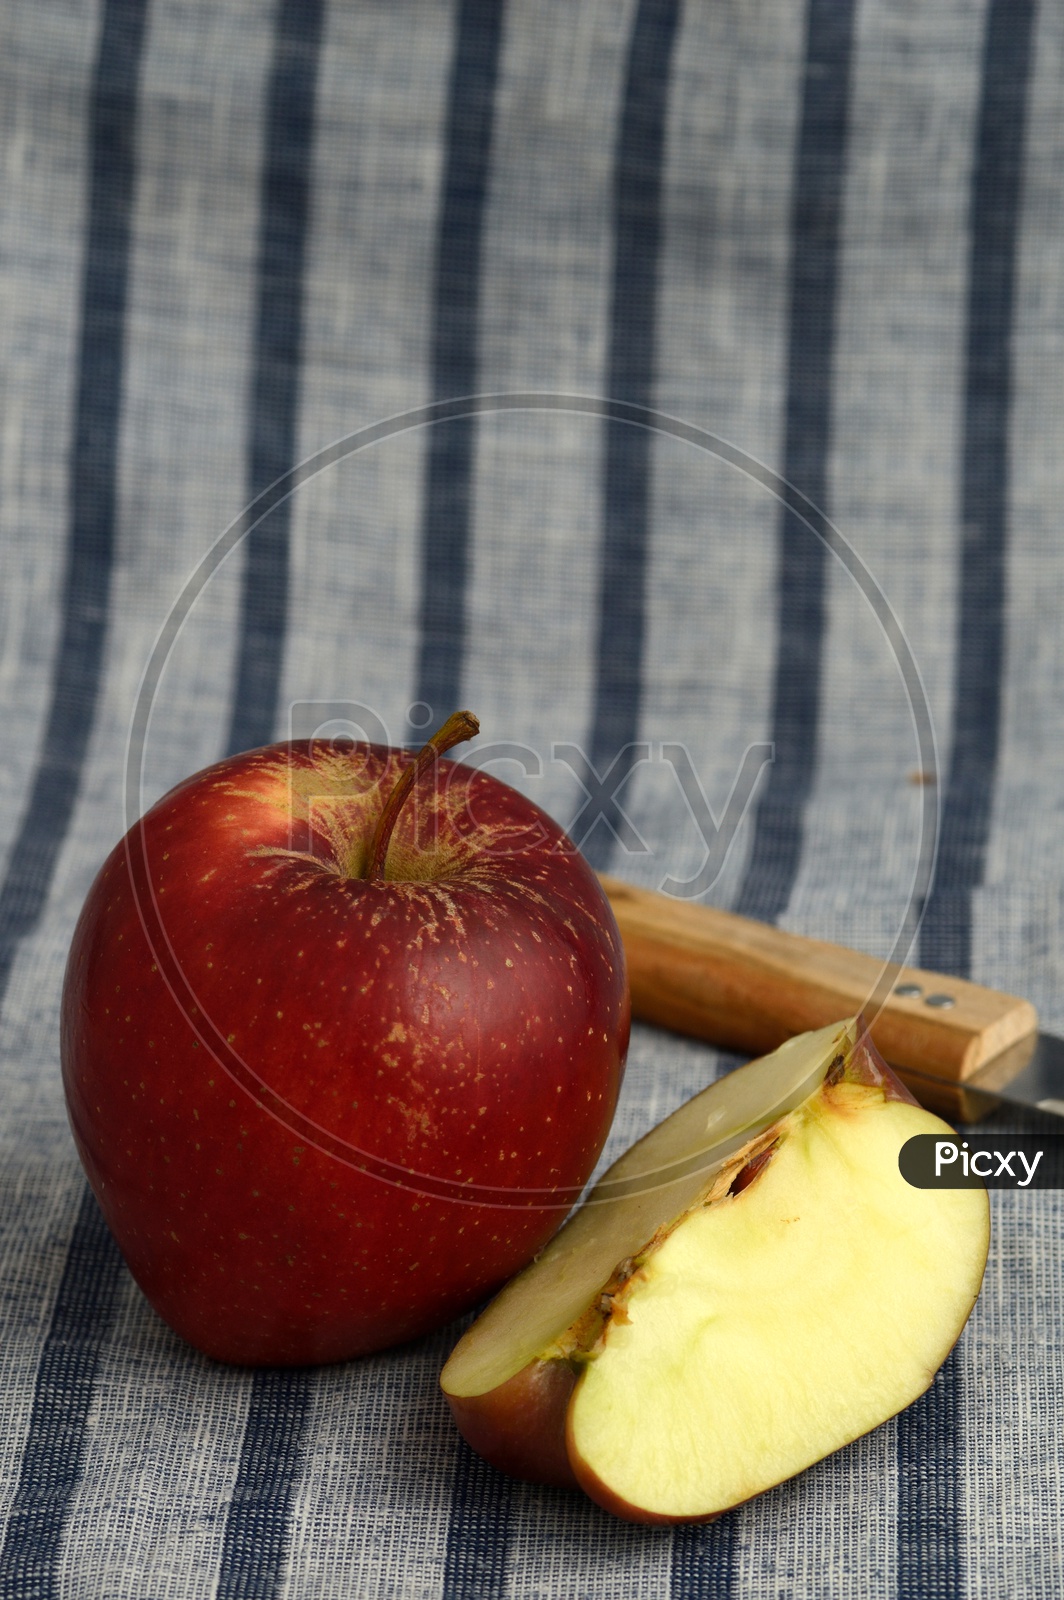 Fresh Red Apples And Slices With Knife  on an Table Cloth Background